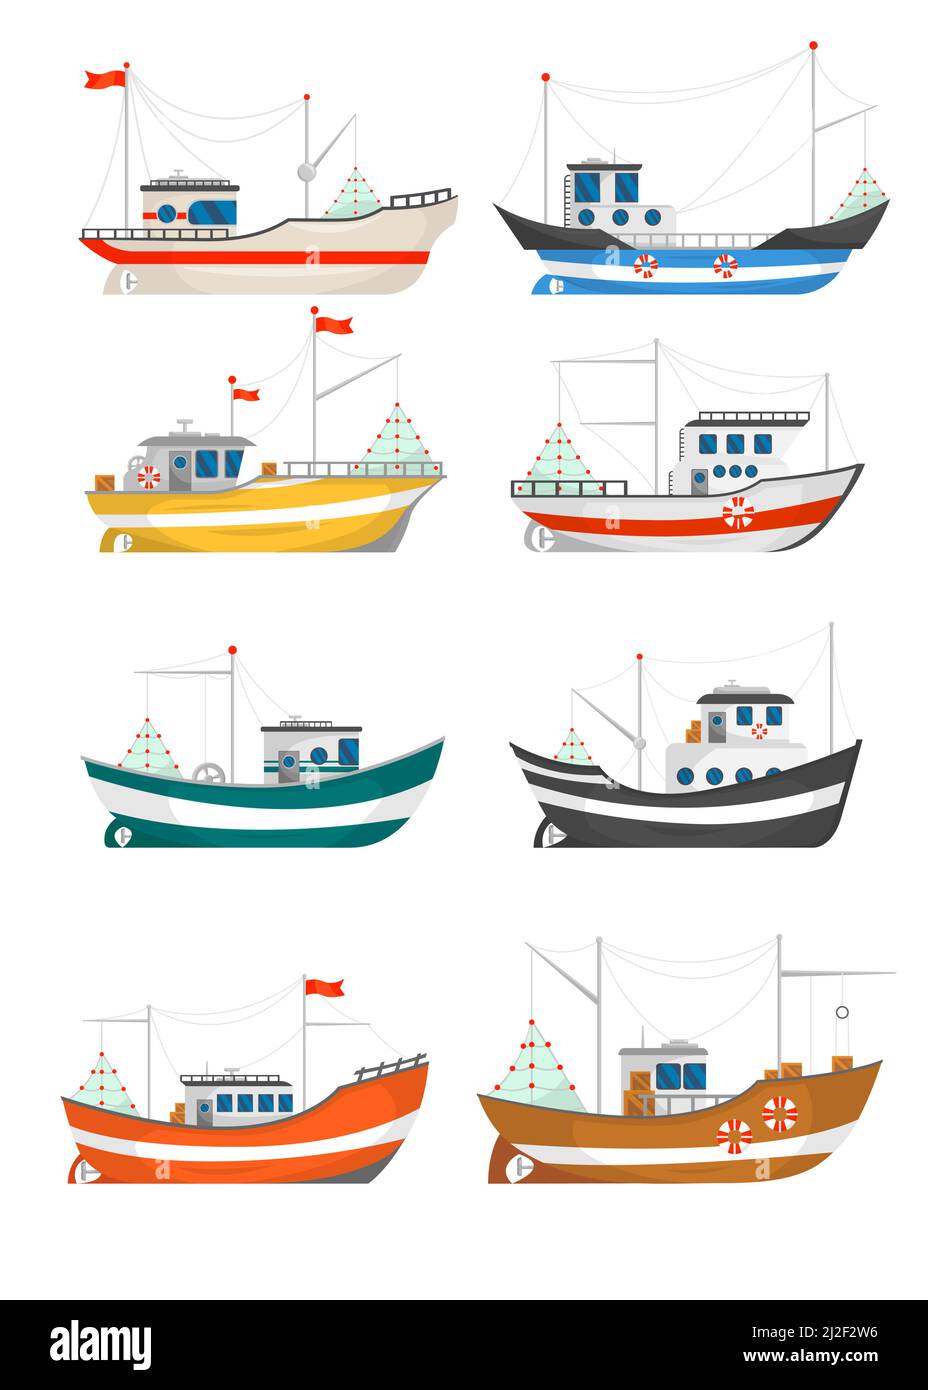 Collection of fishing boats vector illustrations. Fisherman trawlers, ships with cranes lifting nets isolated on white. For food and seafood industry, Stock Vector